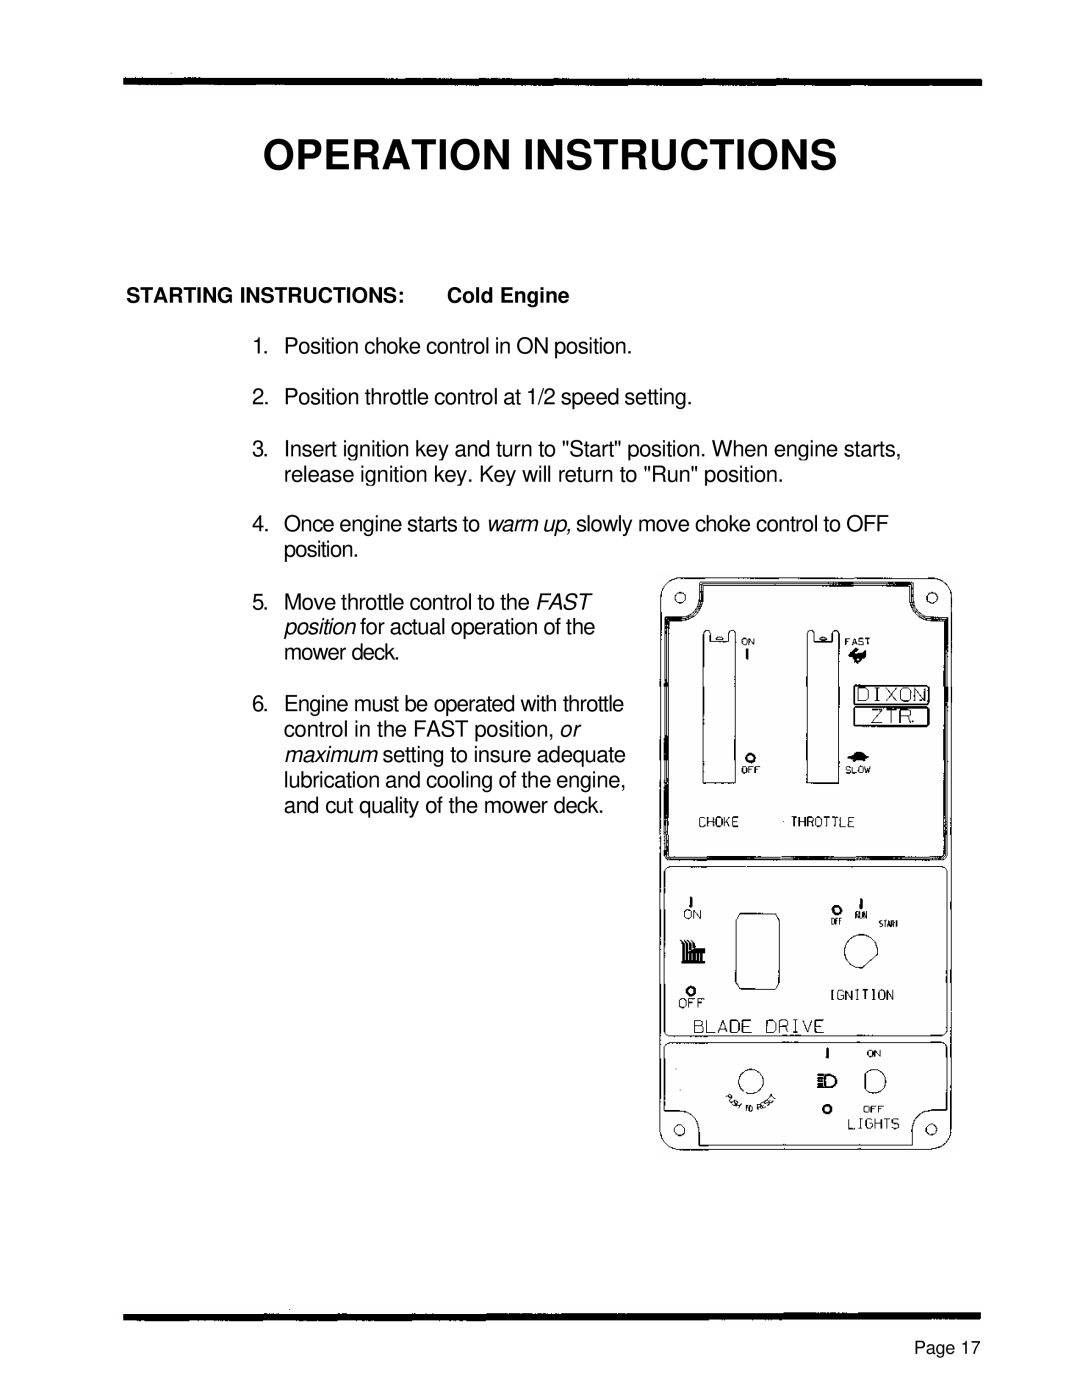 Dixon 5000 Series manual Operation Instructions, Position choke control in ON position 